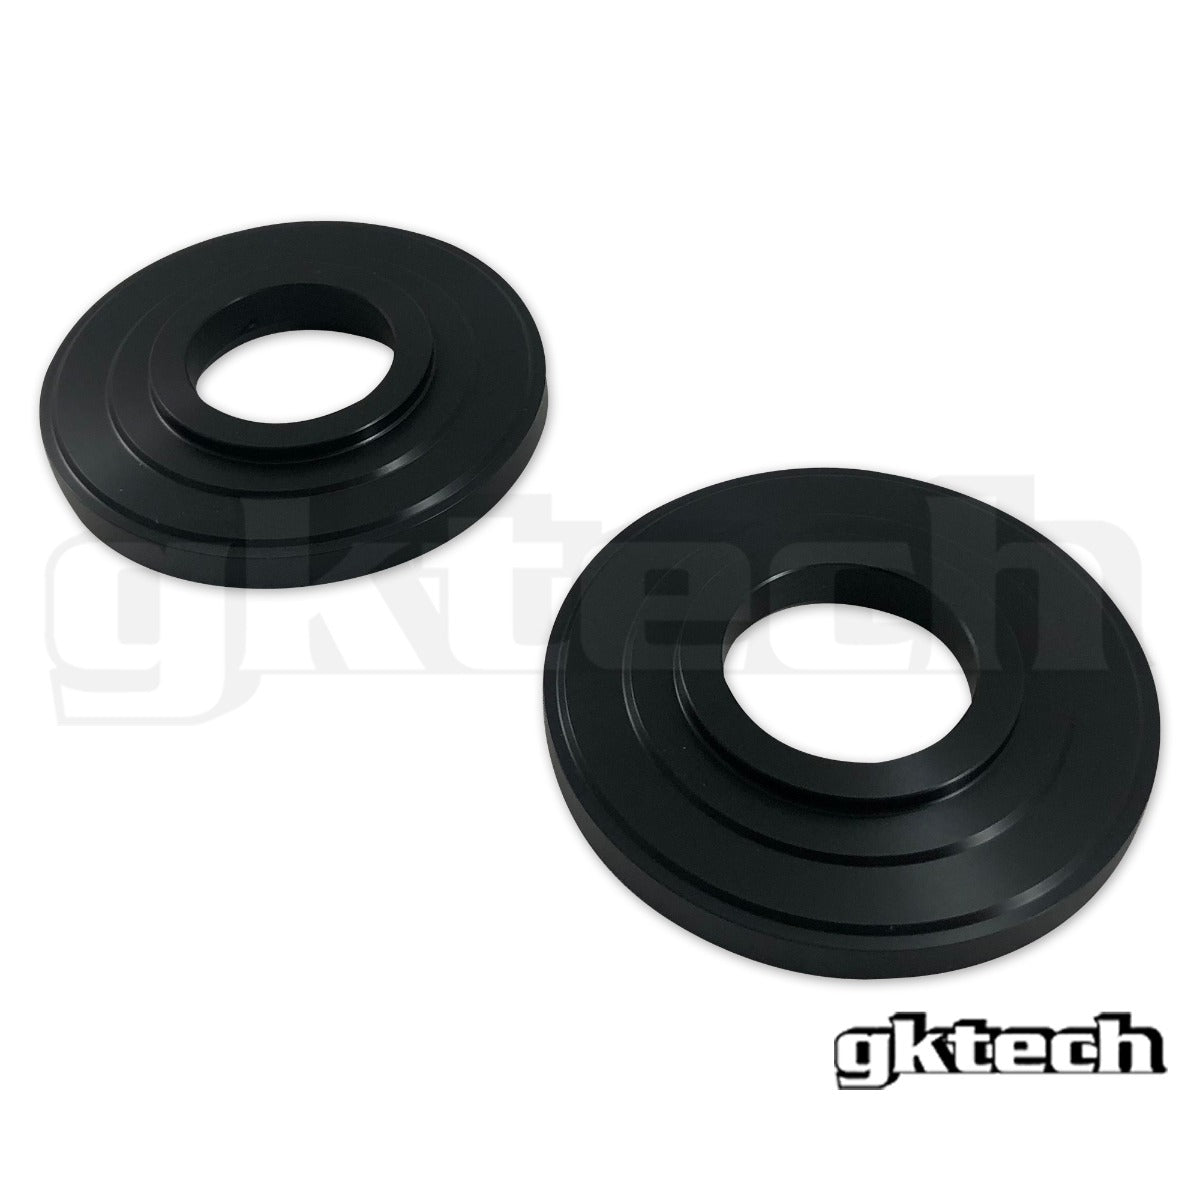 10mm axle spacers